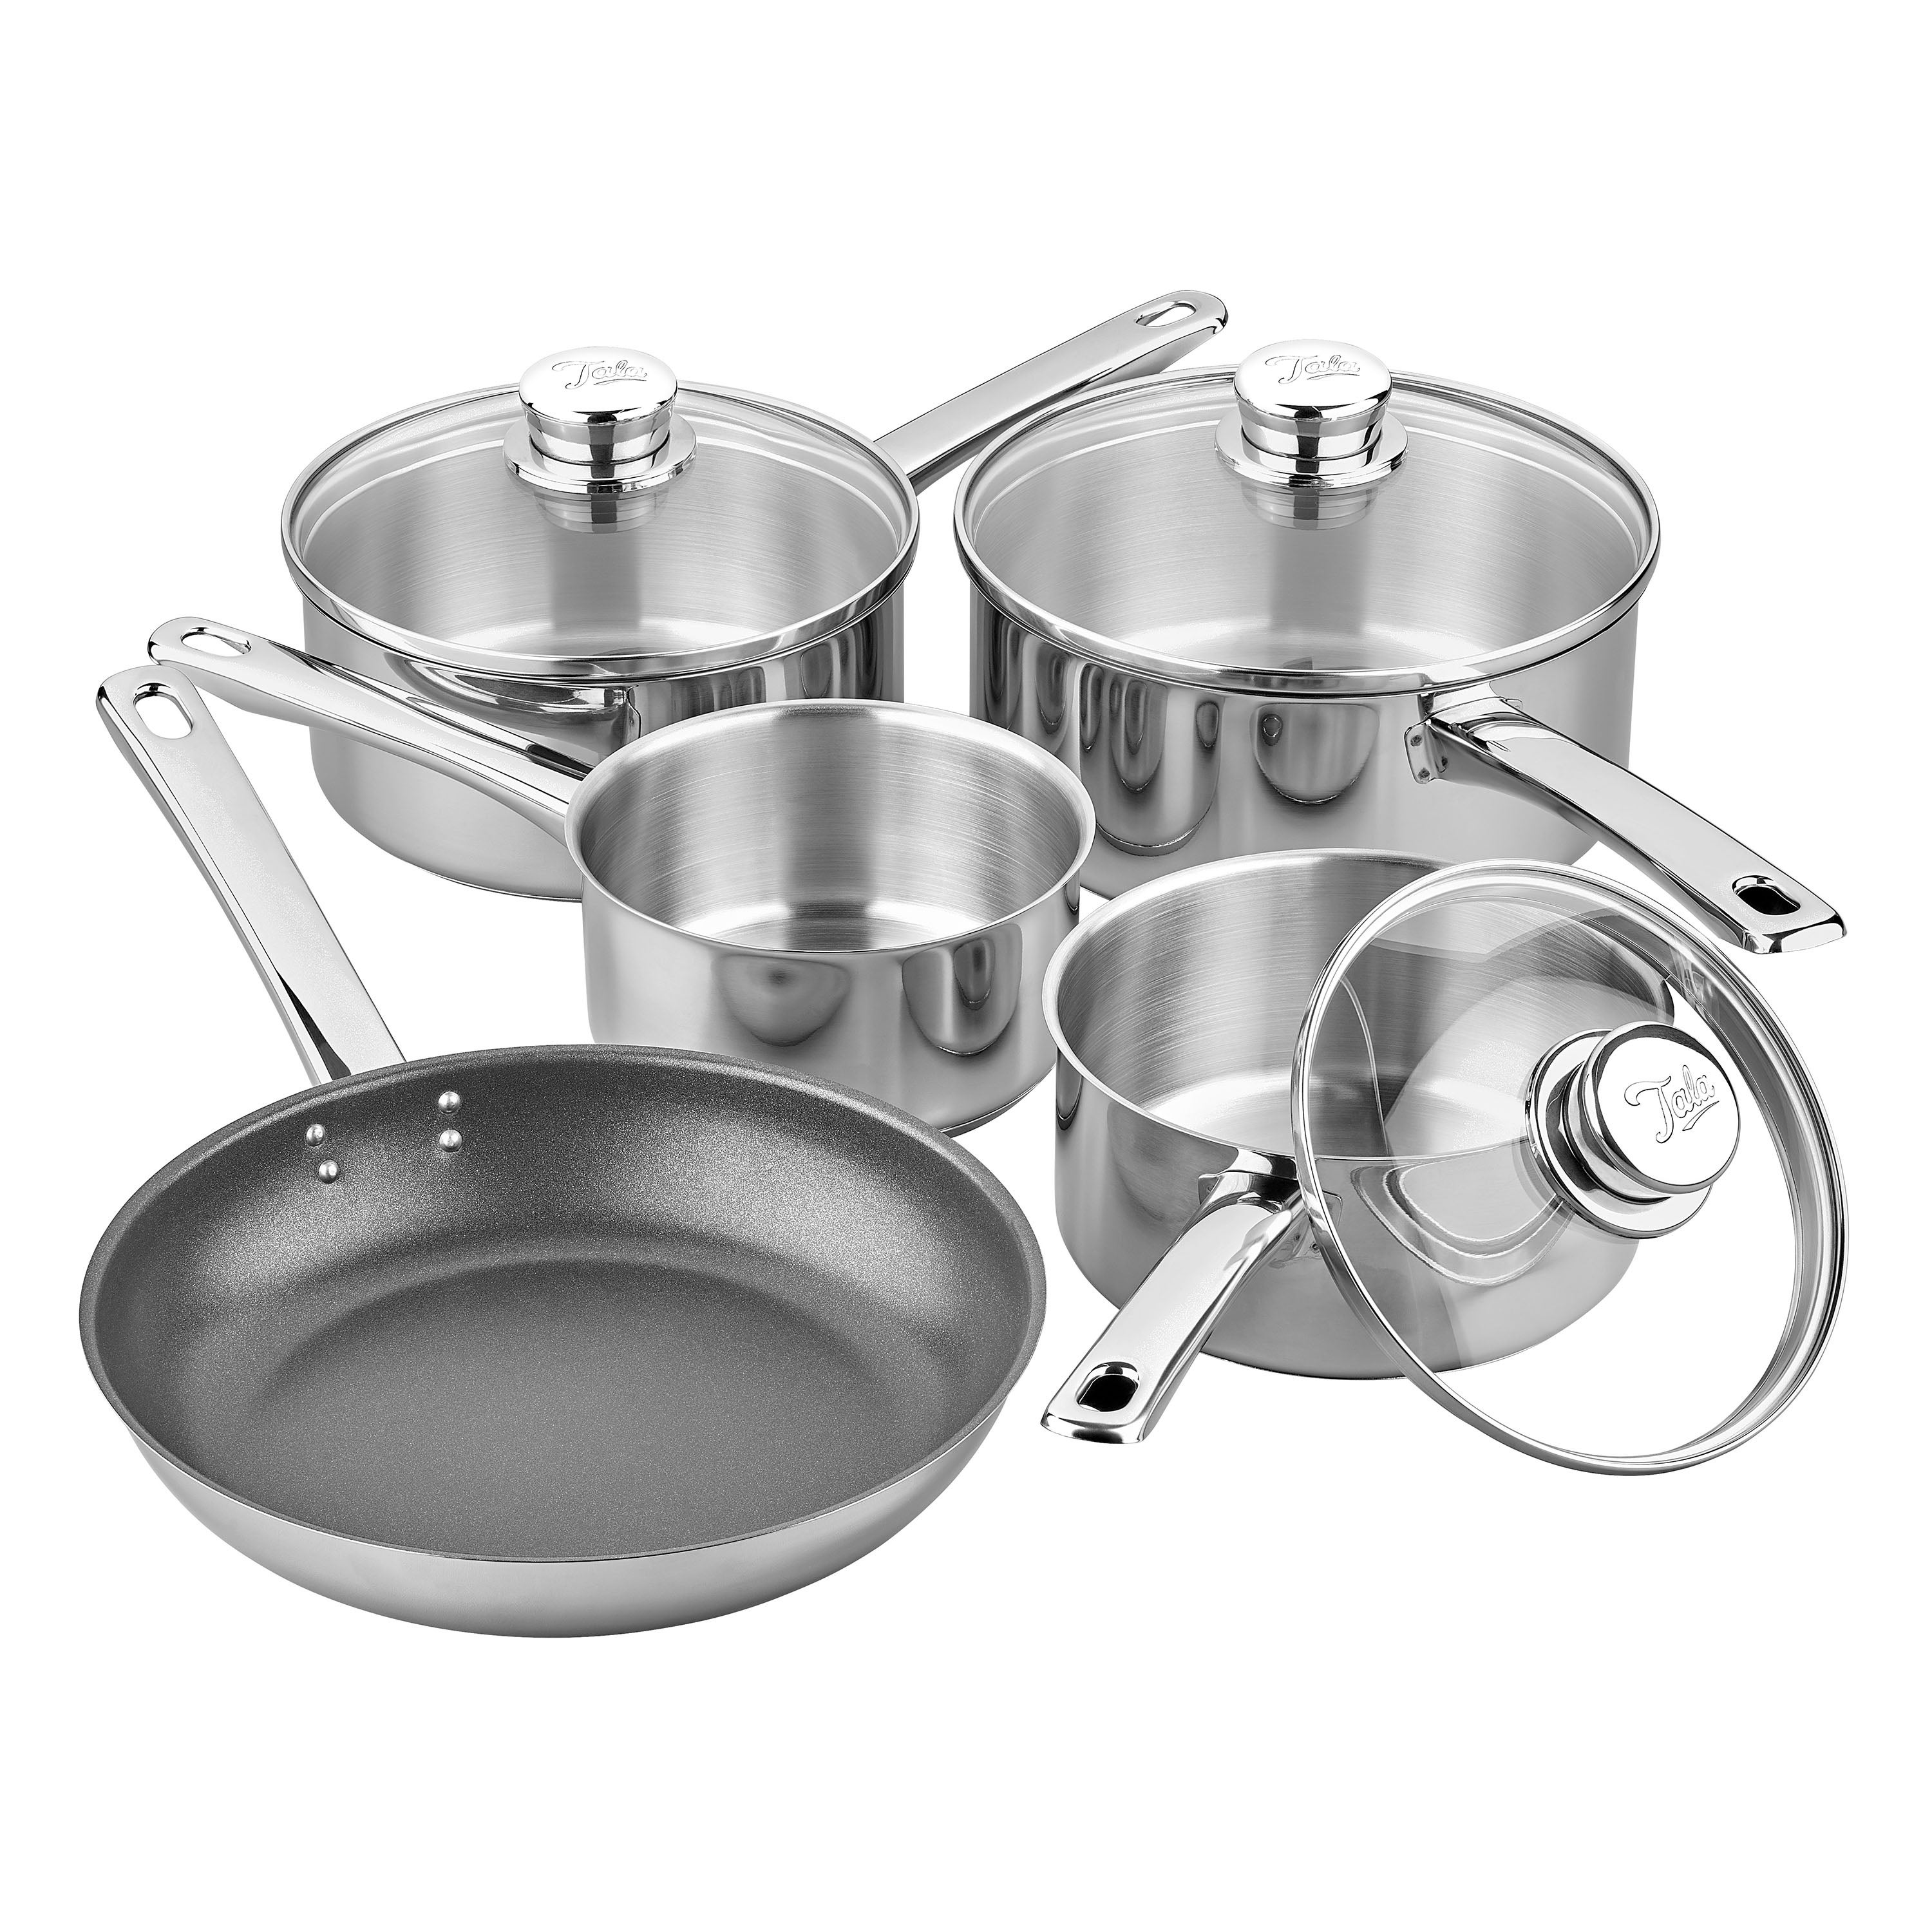 Tala Performance Classic Stainless Steel 5 Piece Pan Set